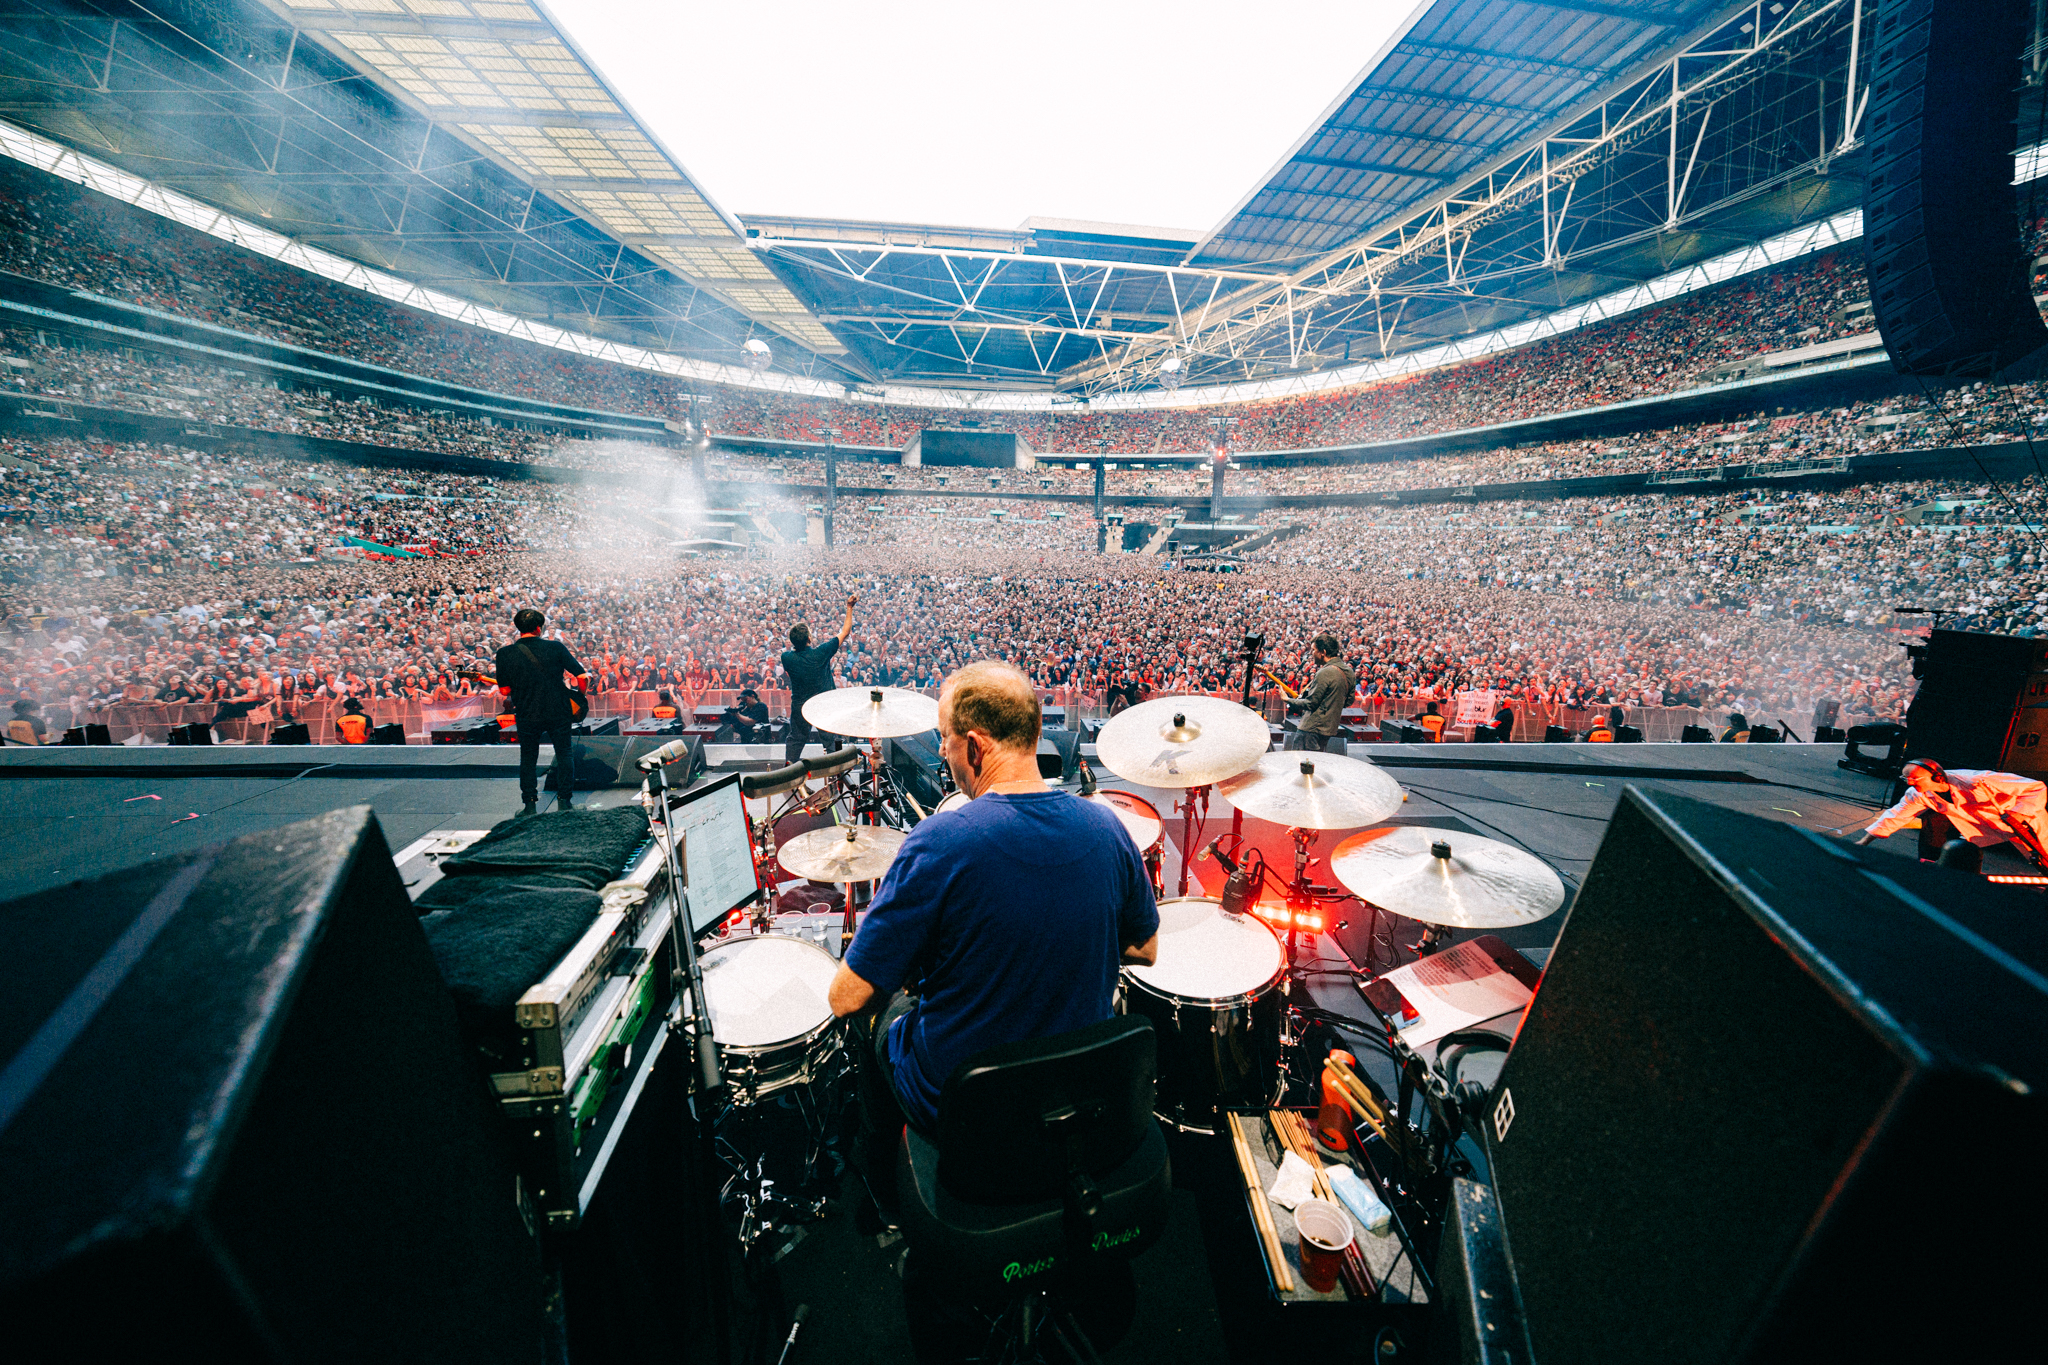 An emotional Dave Rowntree on the drums at Wembley